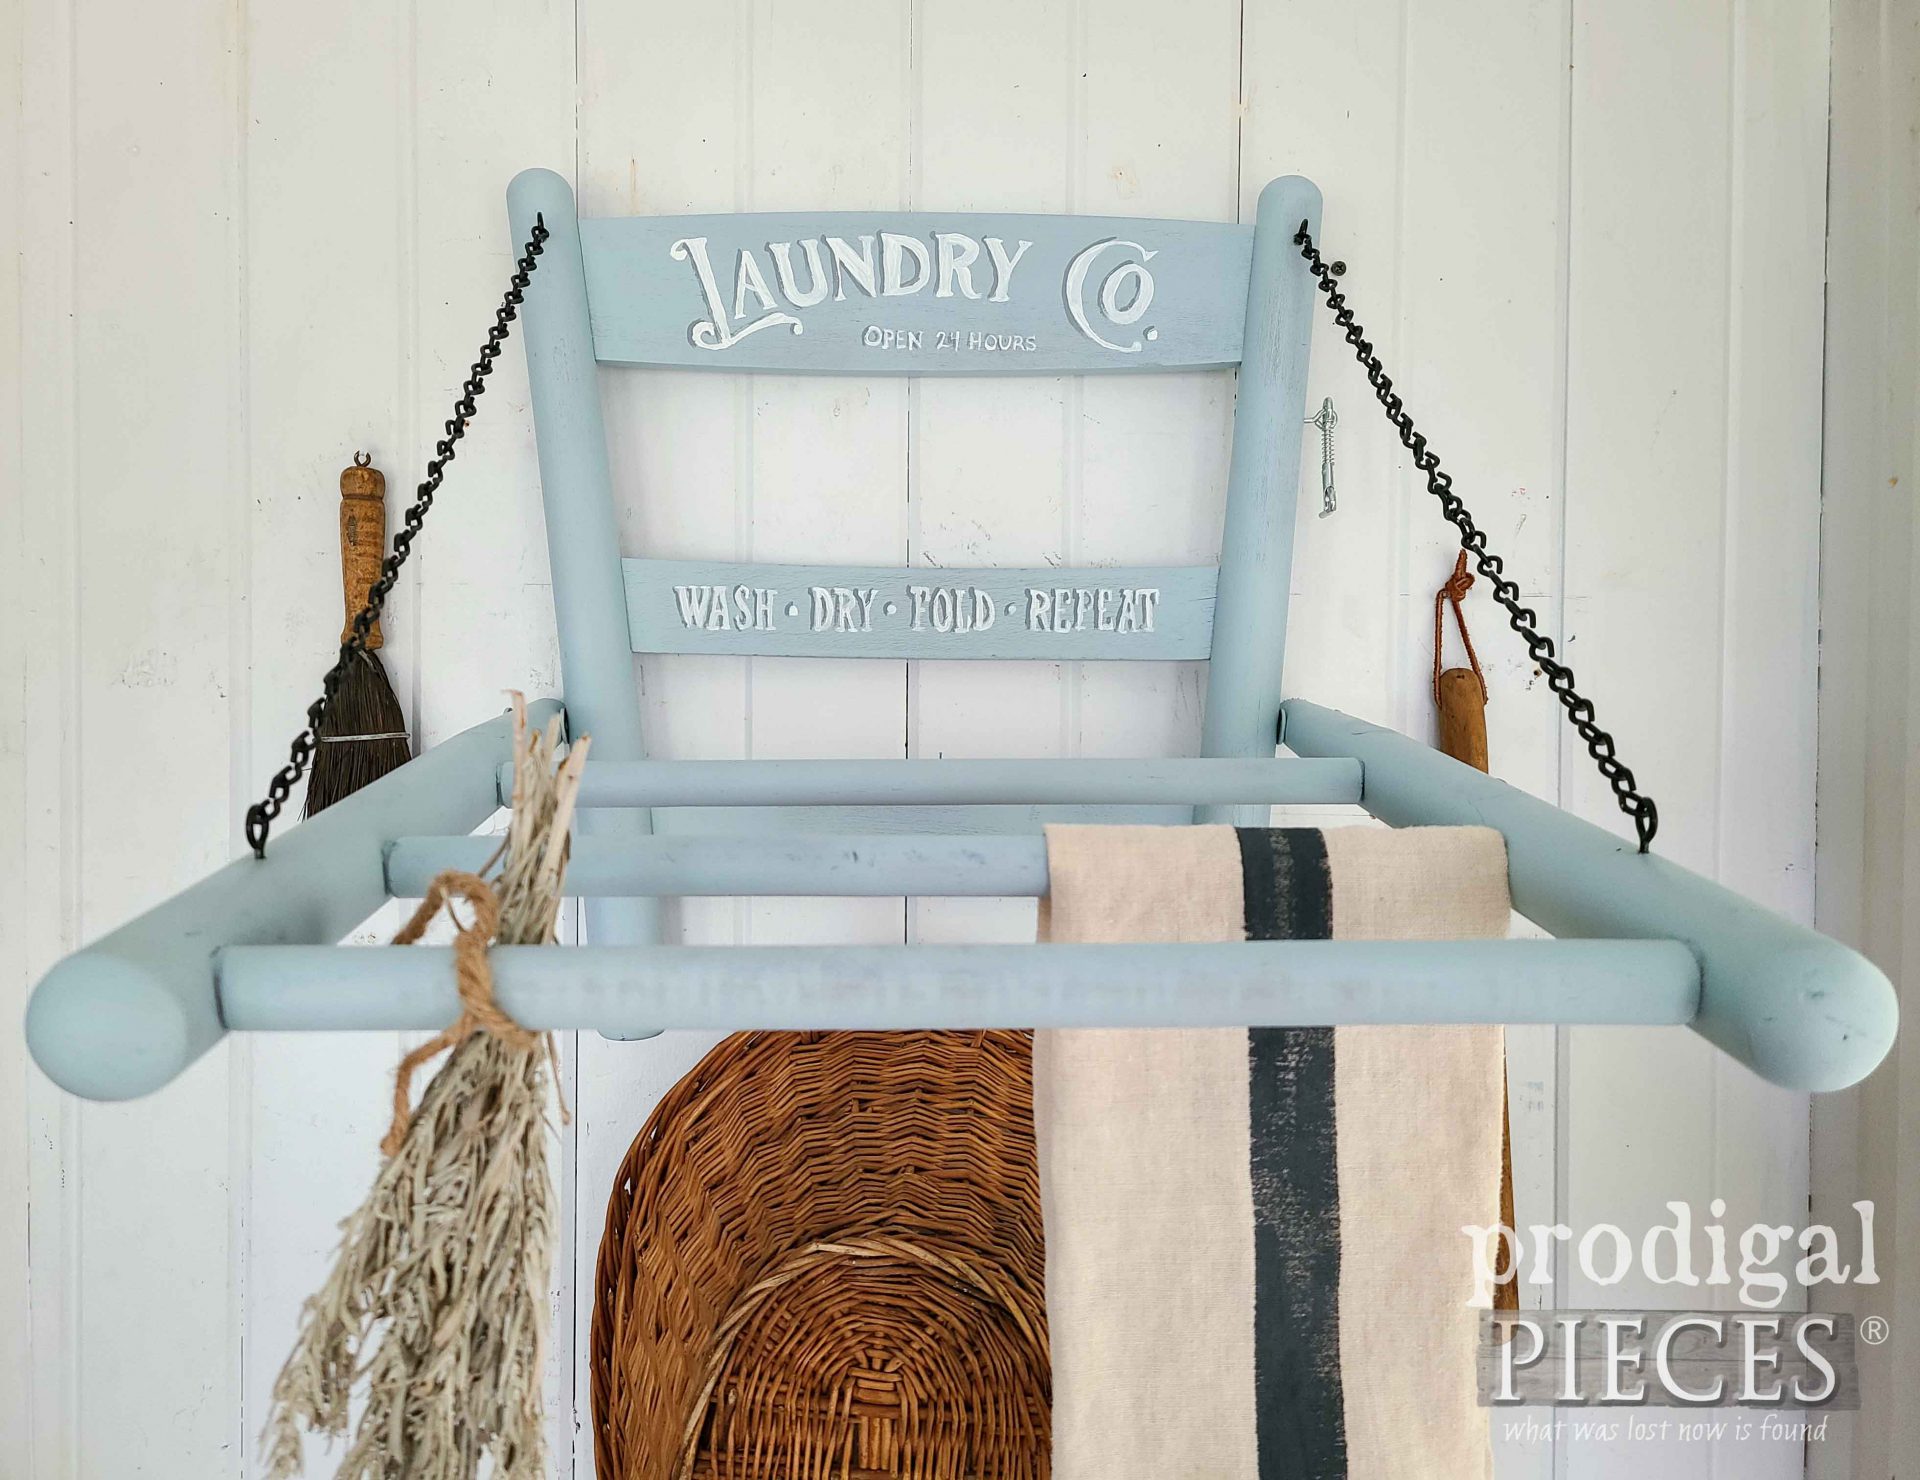 Upcycled Folding Laundry Rack from a Damaged Vintage Caned Chair by Larissa of Prodigal Pieces | prodigalpieces.com #prodigalpieces #laundry #diy